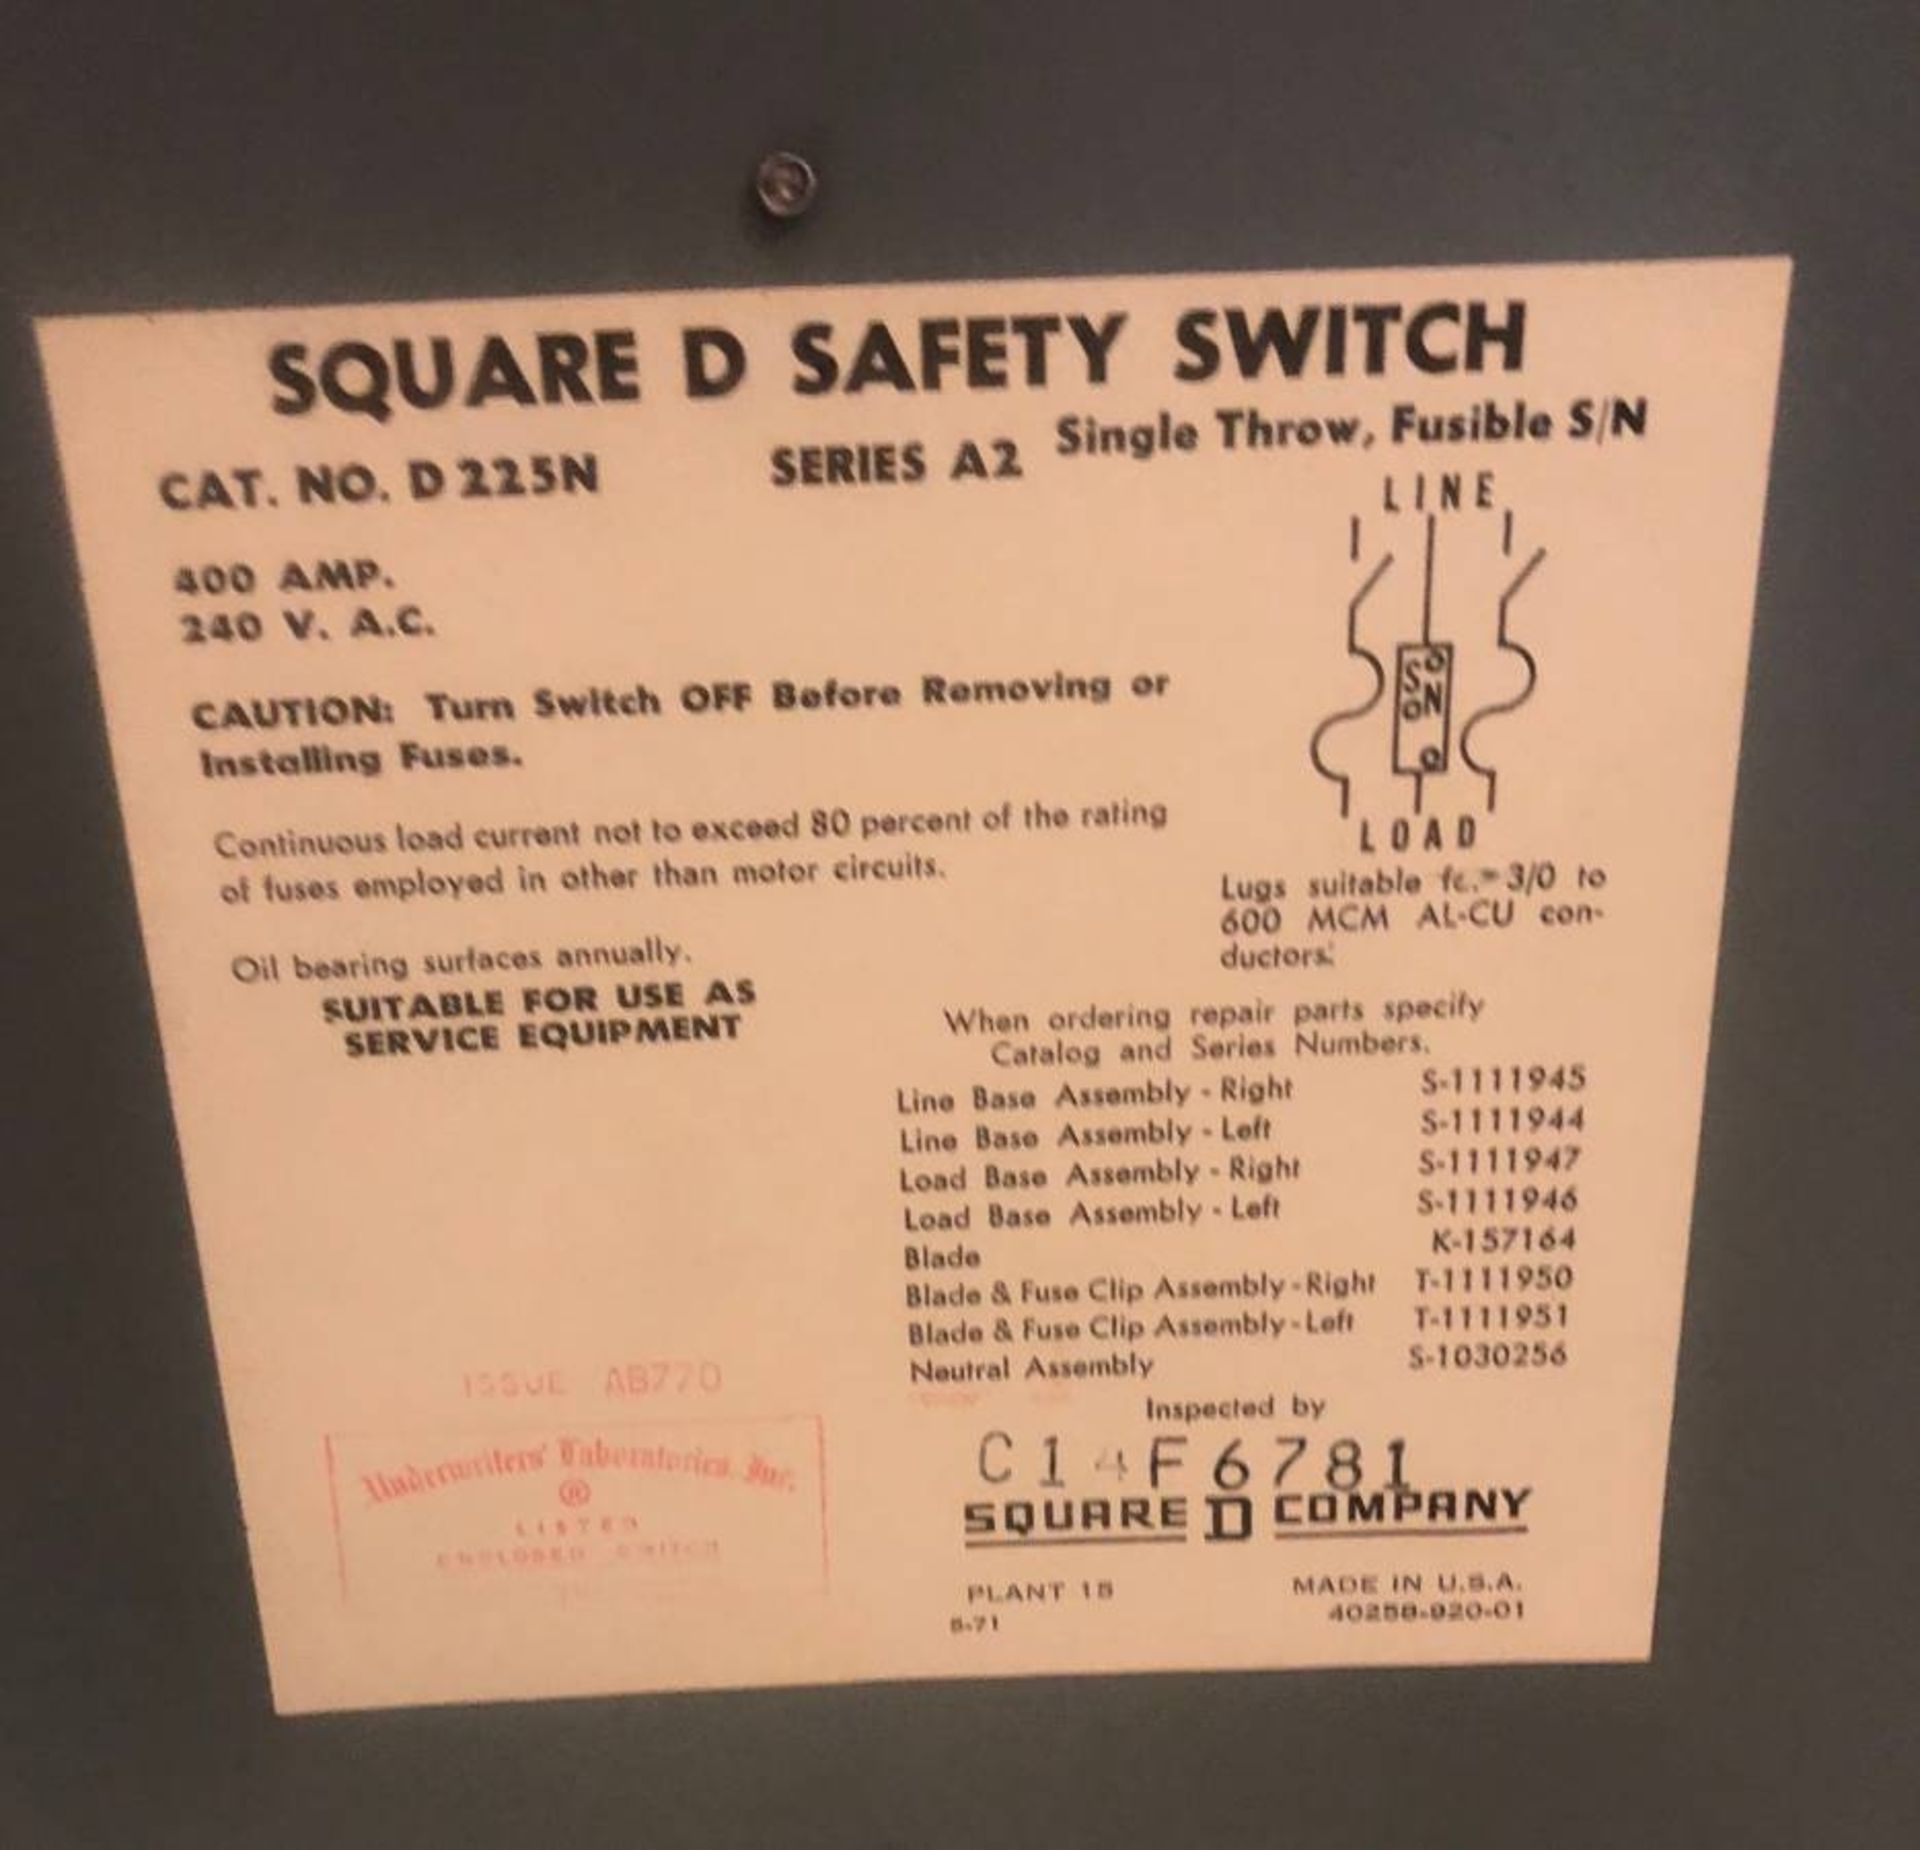 Square D D225N GD Safety Switch 400A 240V FUSIBLE $1400 unit   USED, UNSURE IF ANY PROBLEMS - Image 2 of 5